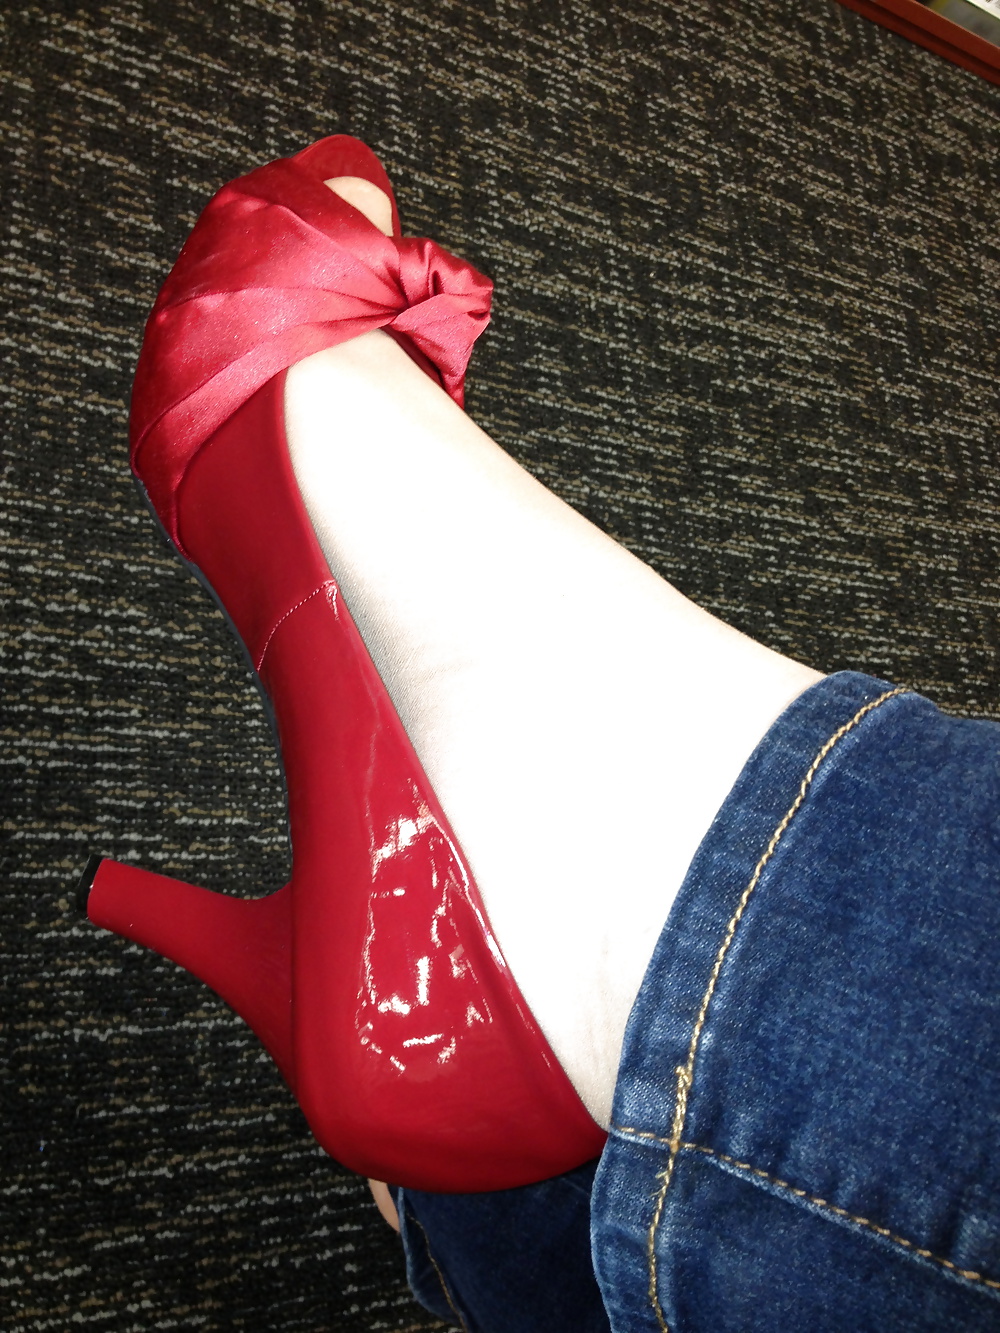 Stocking feet trying on red heels in shoe store #25674009